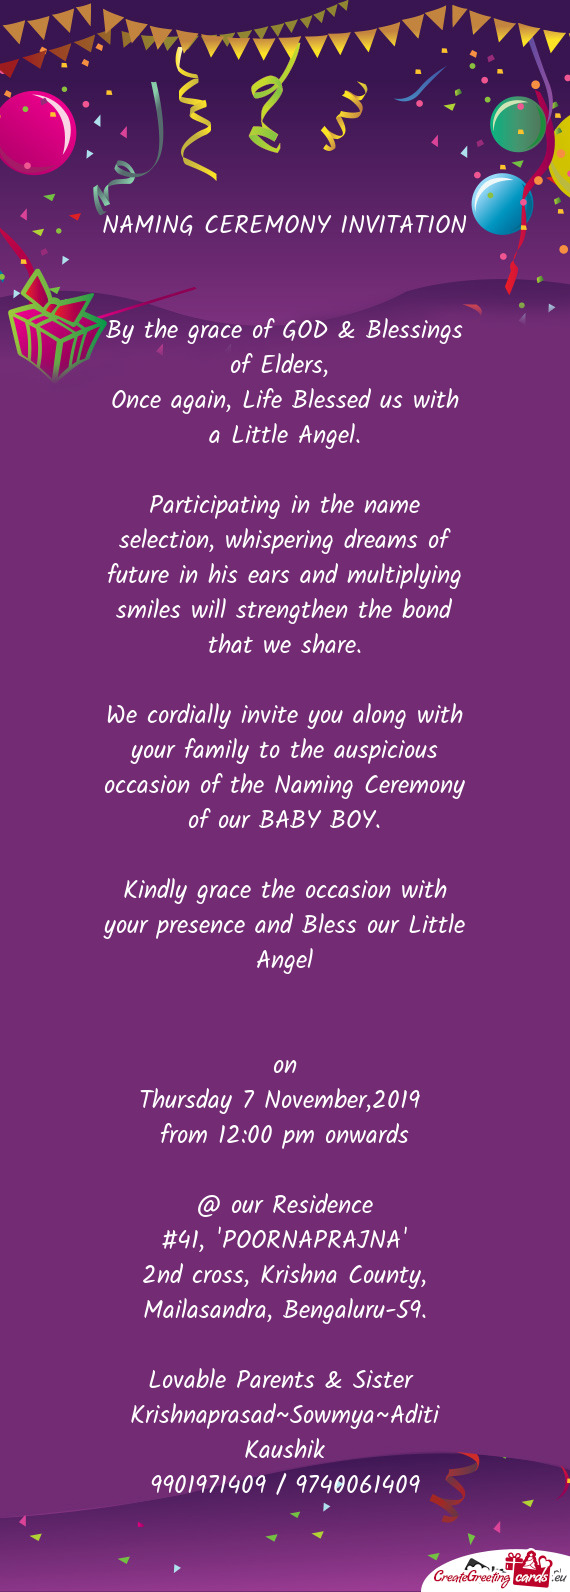 Kindly grace the occasion with your presence and Bless our Little Angel